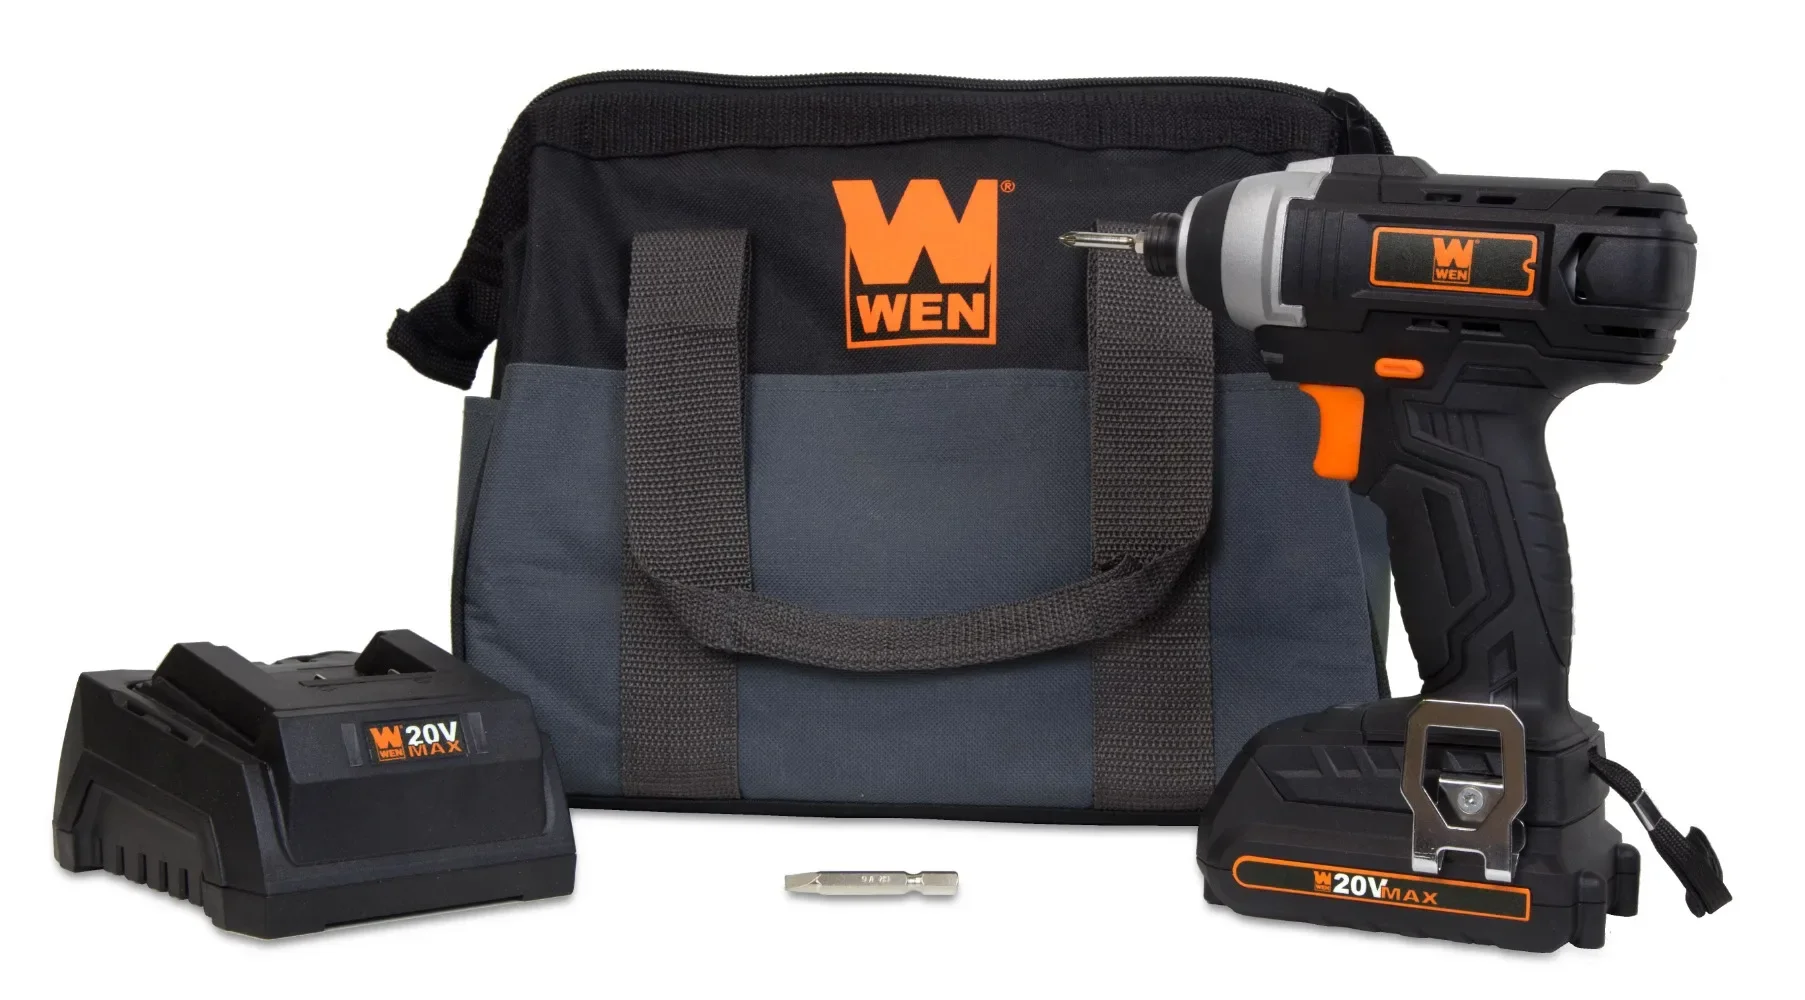 WEN 20-Volt MAX Lithium-Ion Cordless 1/4-Inch Impact Driver W/ Battery, Bits, Charger and Carrying Bag Repair Tool